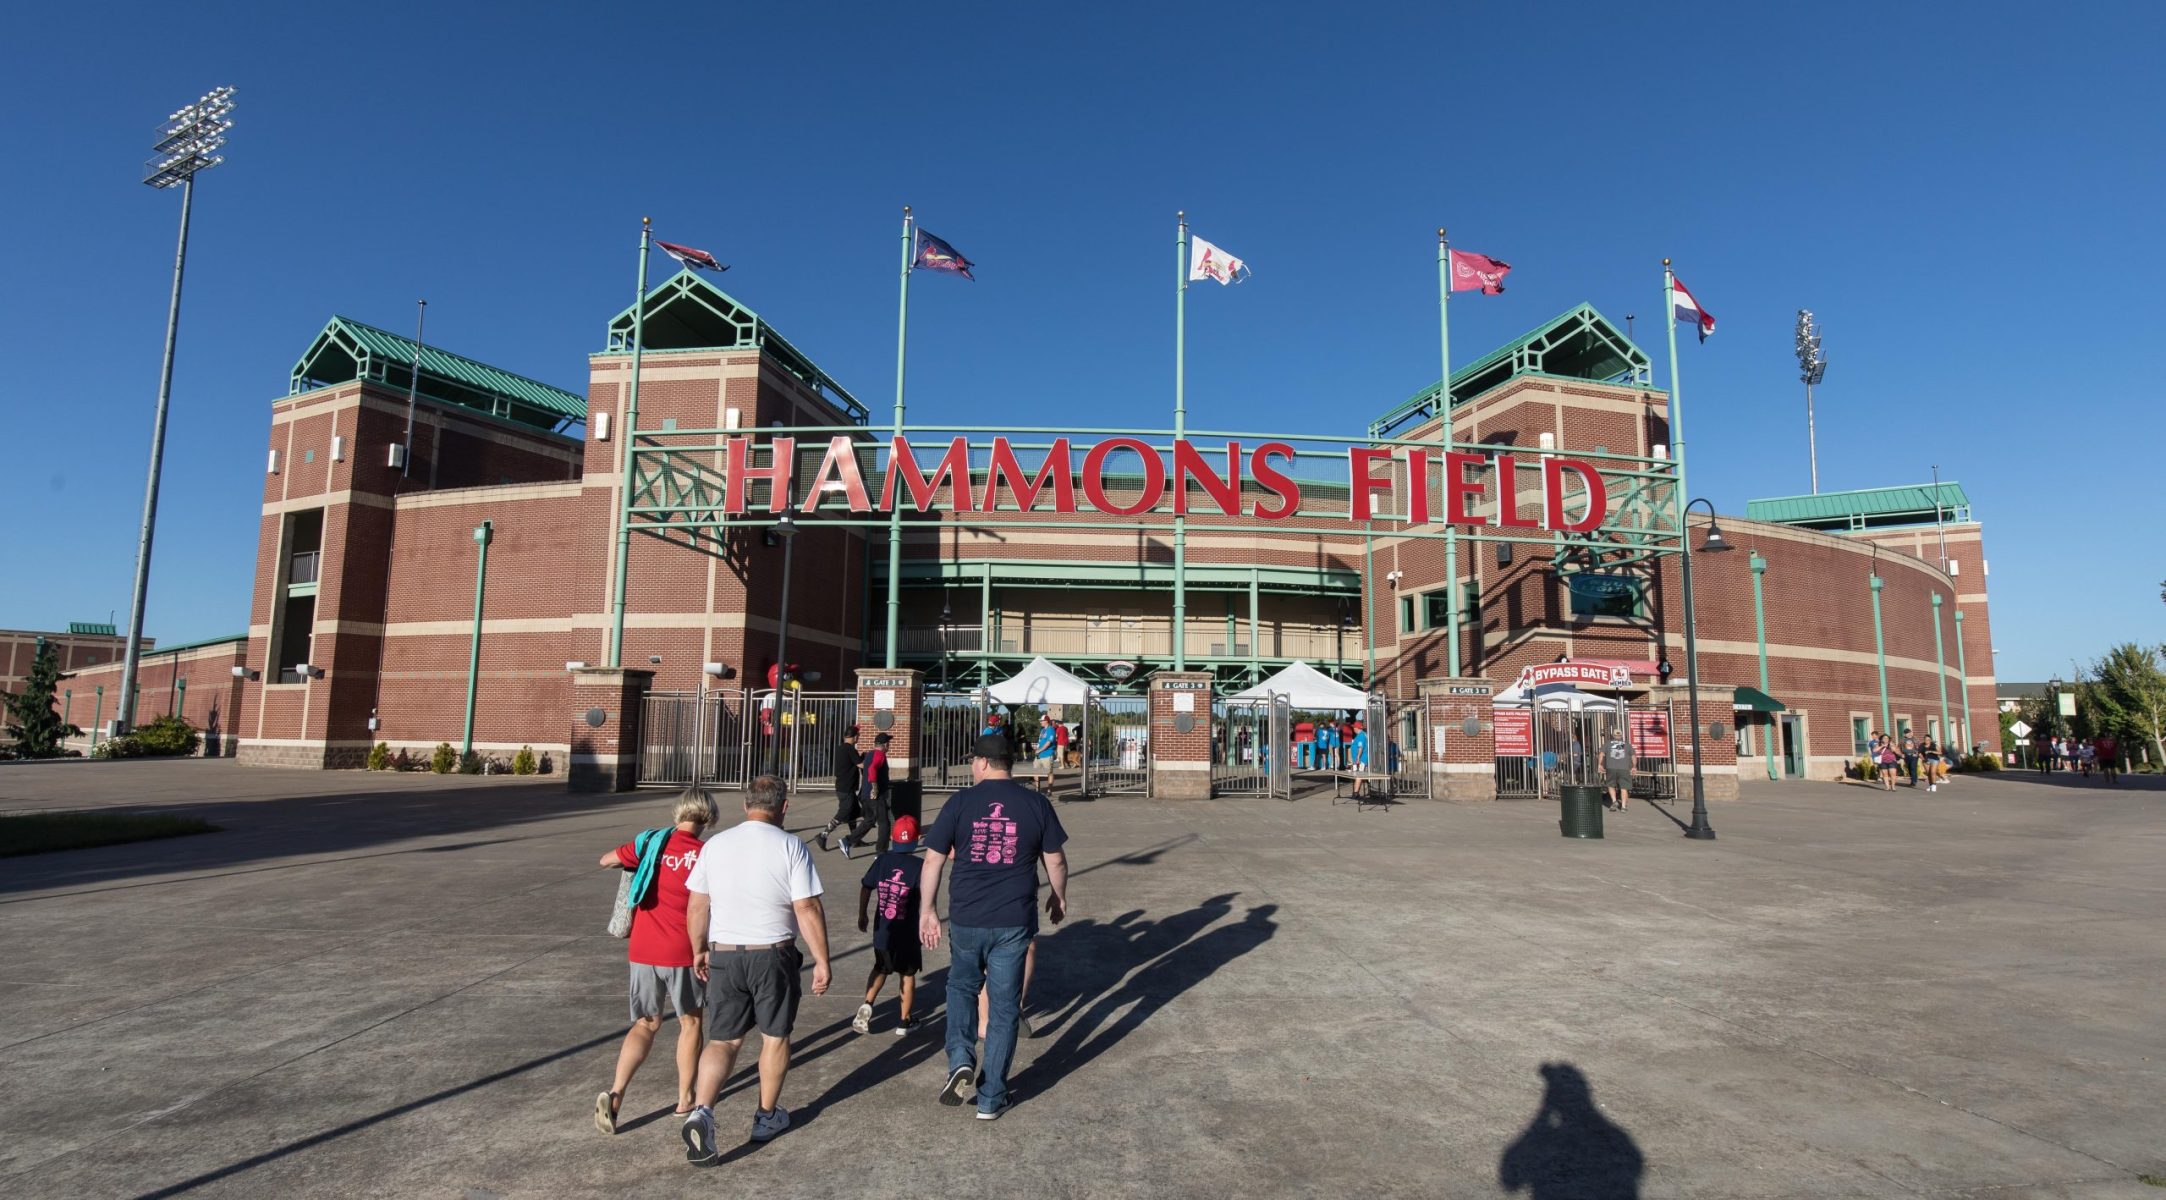 Q&A: Sorting out key points about future of Hammons Field